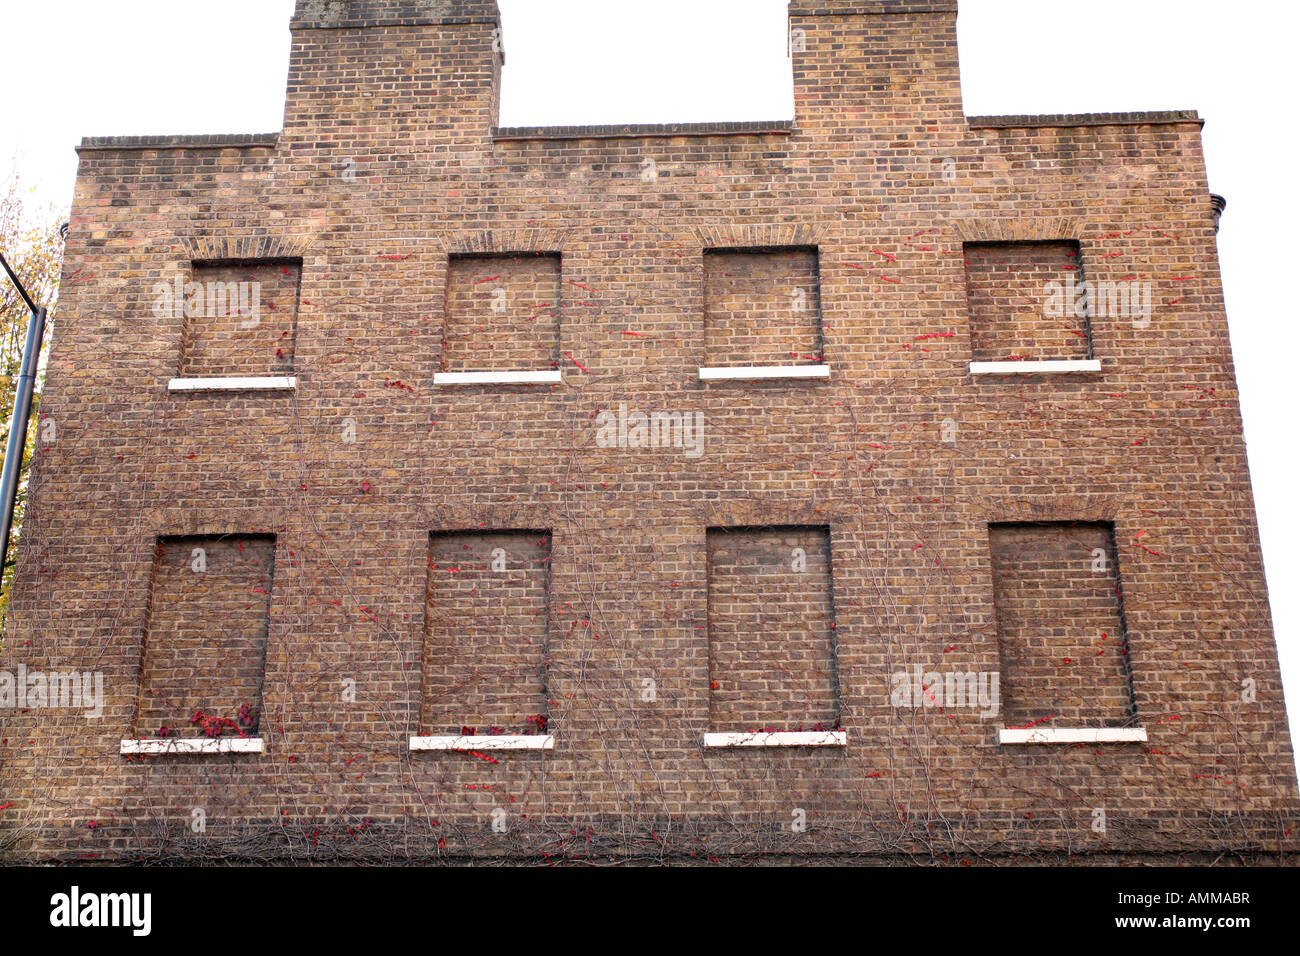 Building with signs of the Window Tax, St Johns Wood, London Stock Photo